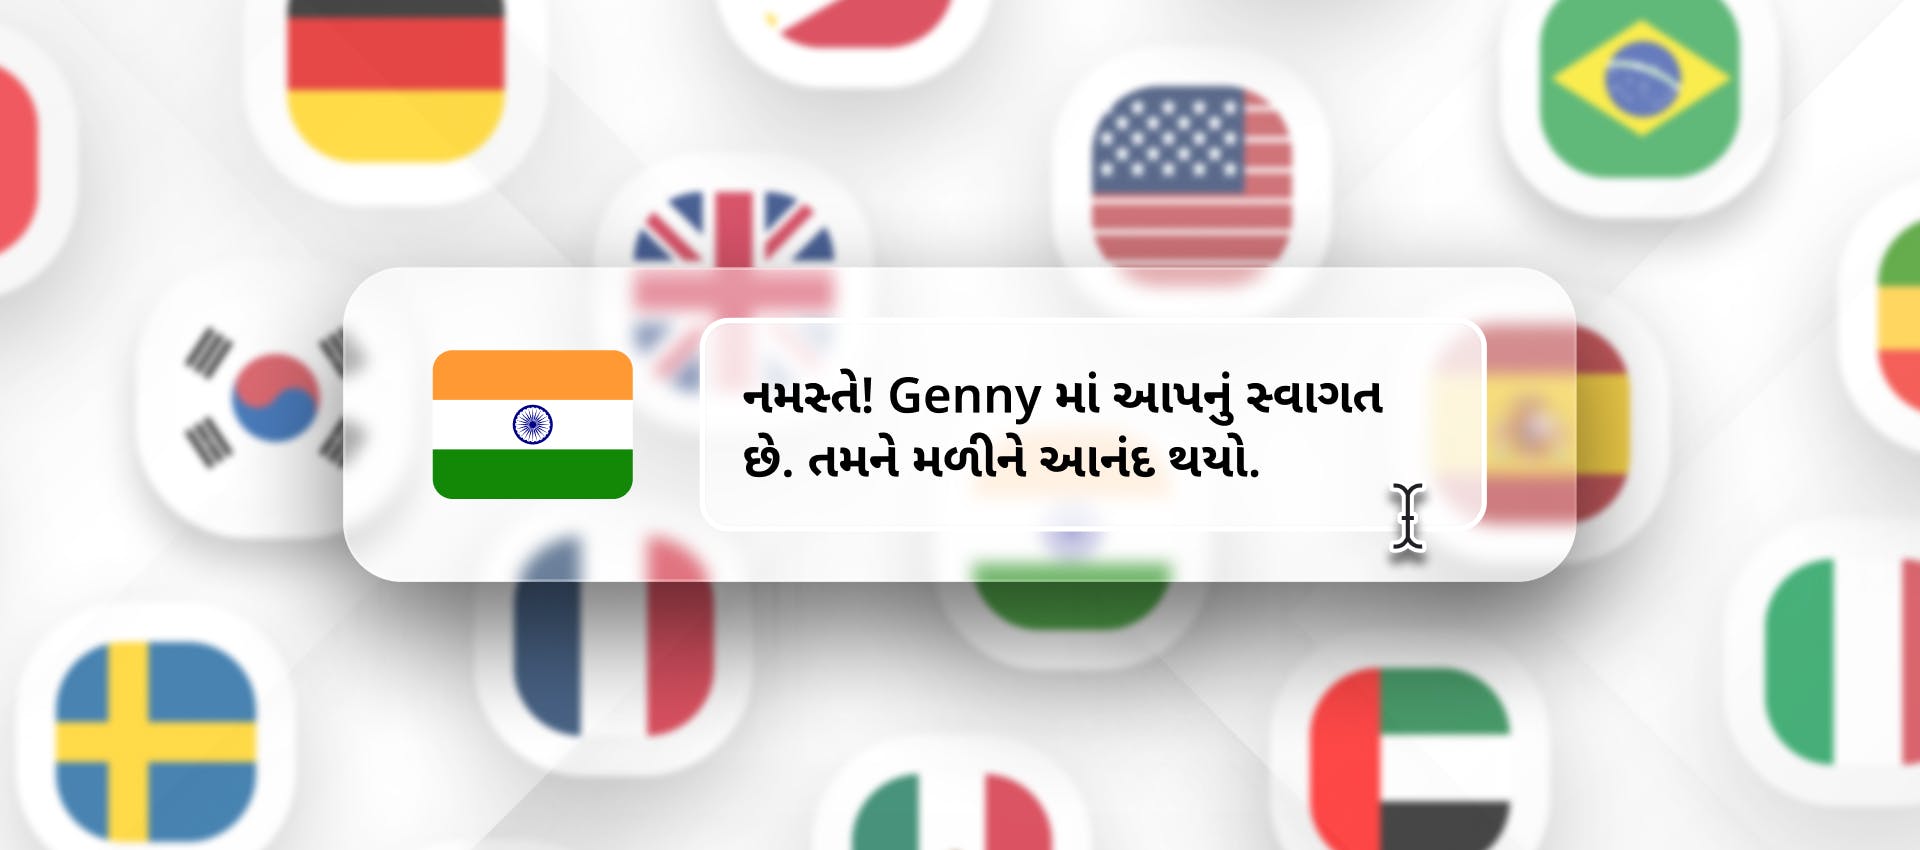 Gujarati phrase for Gujarati TTS generation with different flags in the background